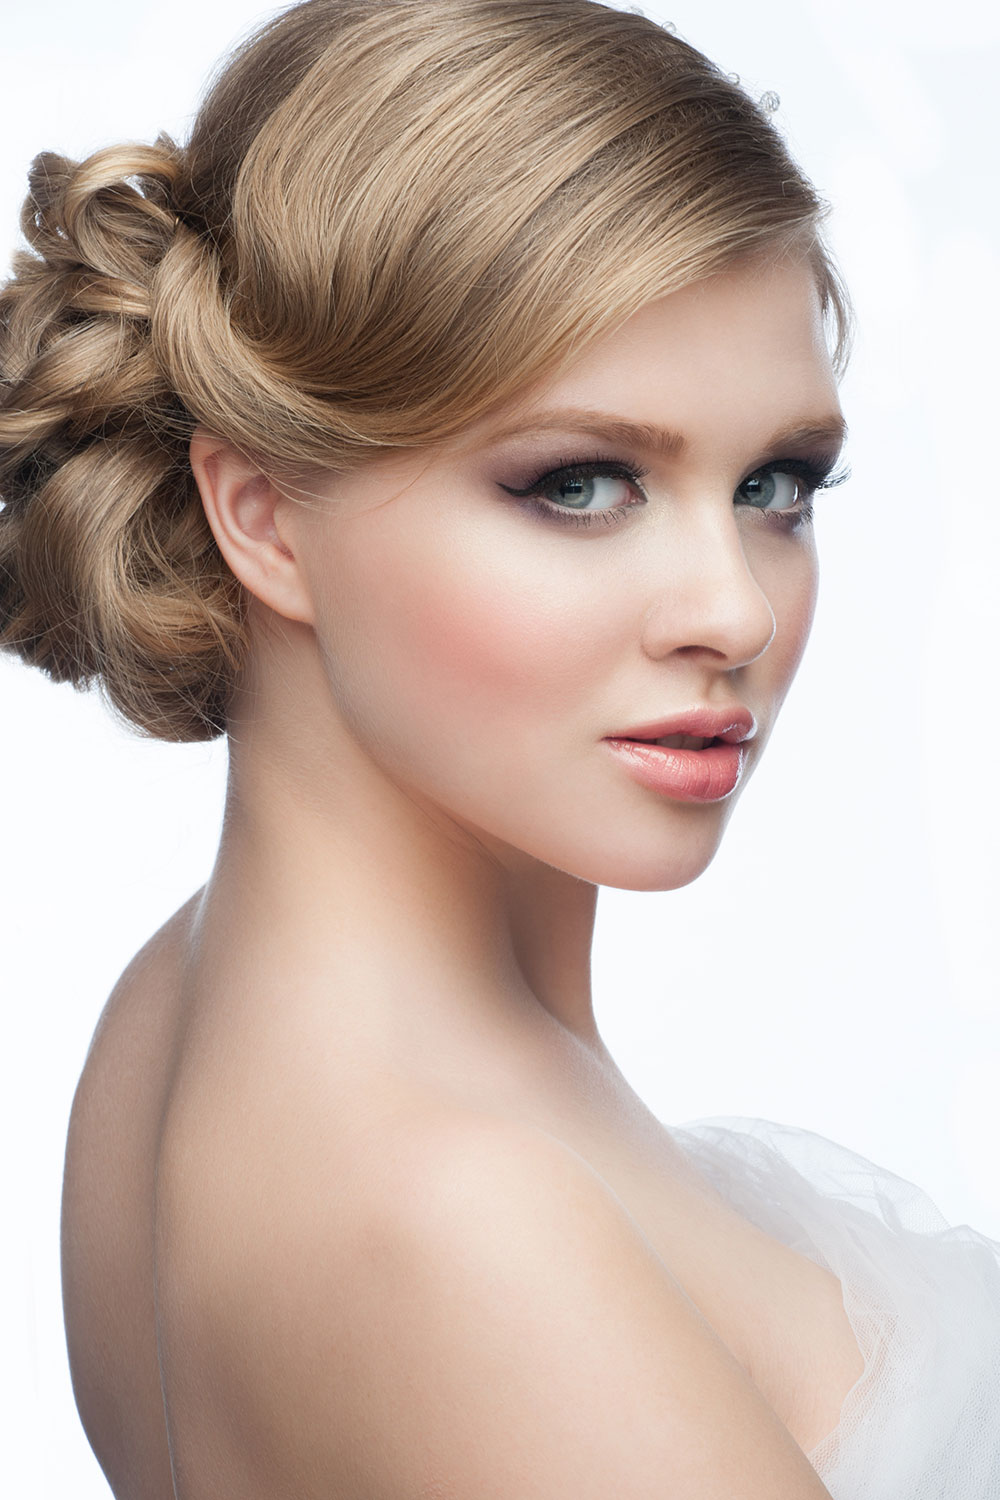 Neat side parted plaited bun Bridal hairstyle